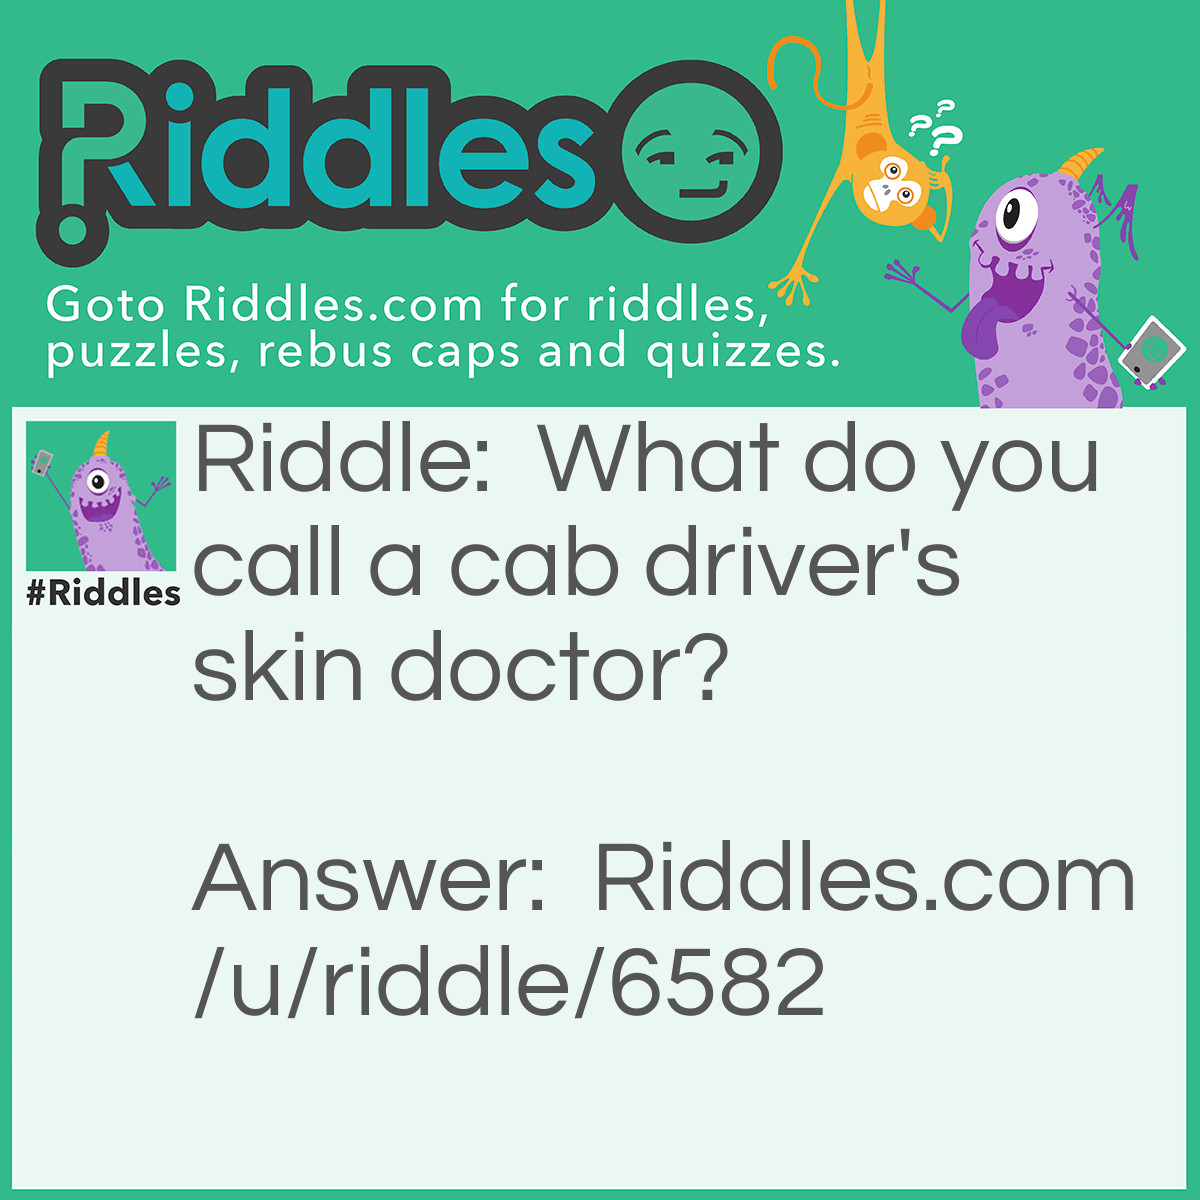 Riddle: What do you call a cab driver's skin doctor? Answer: A taxidermatologist.